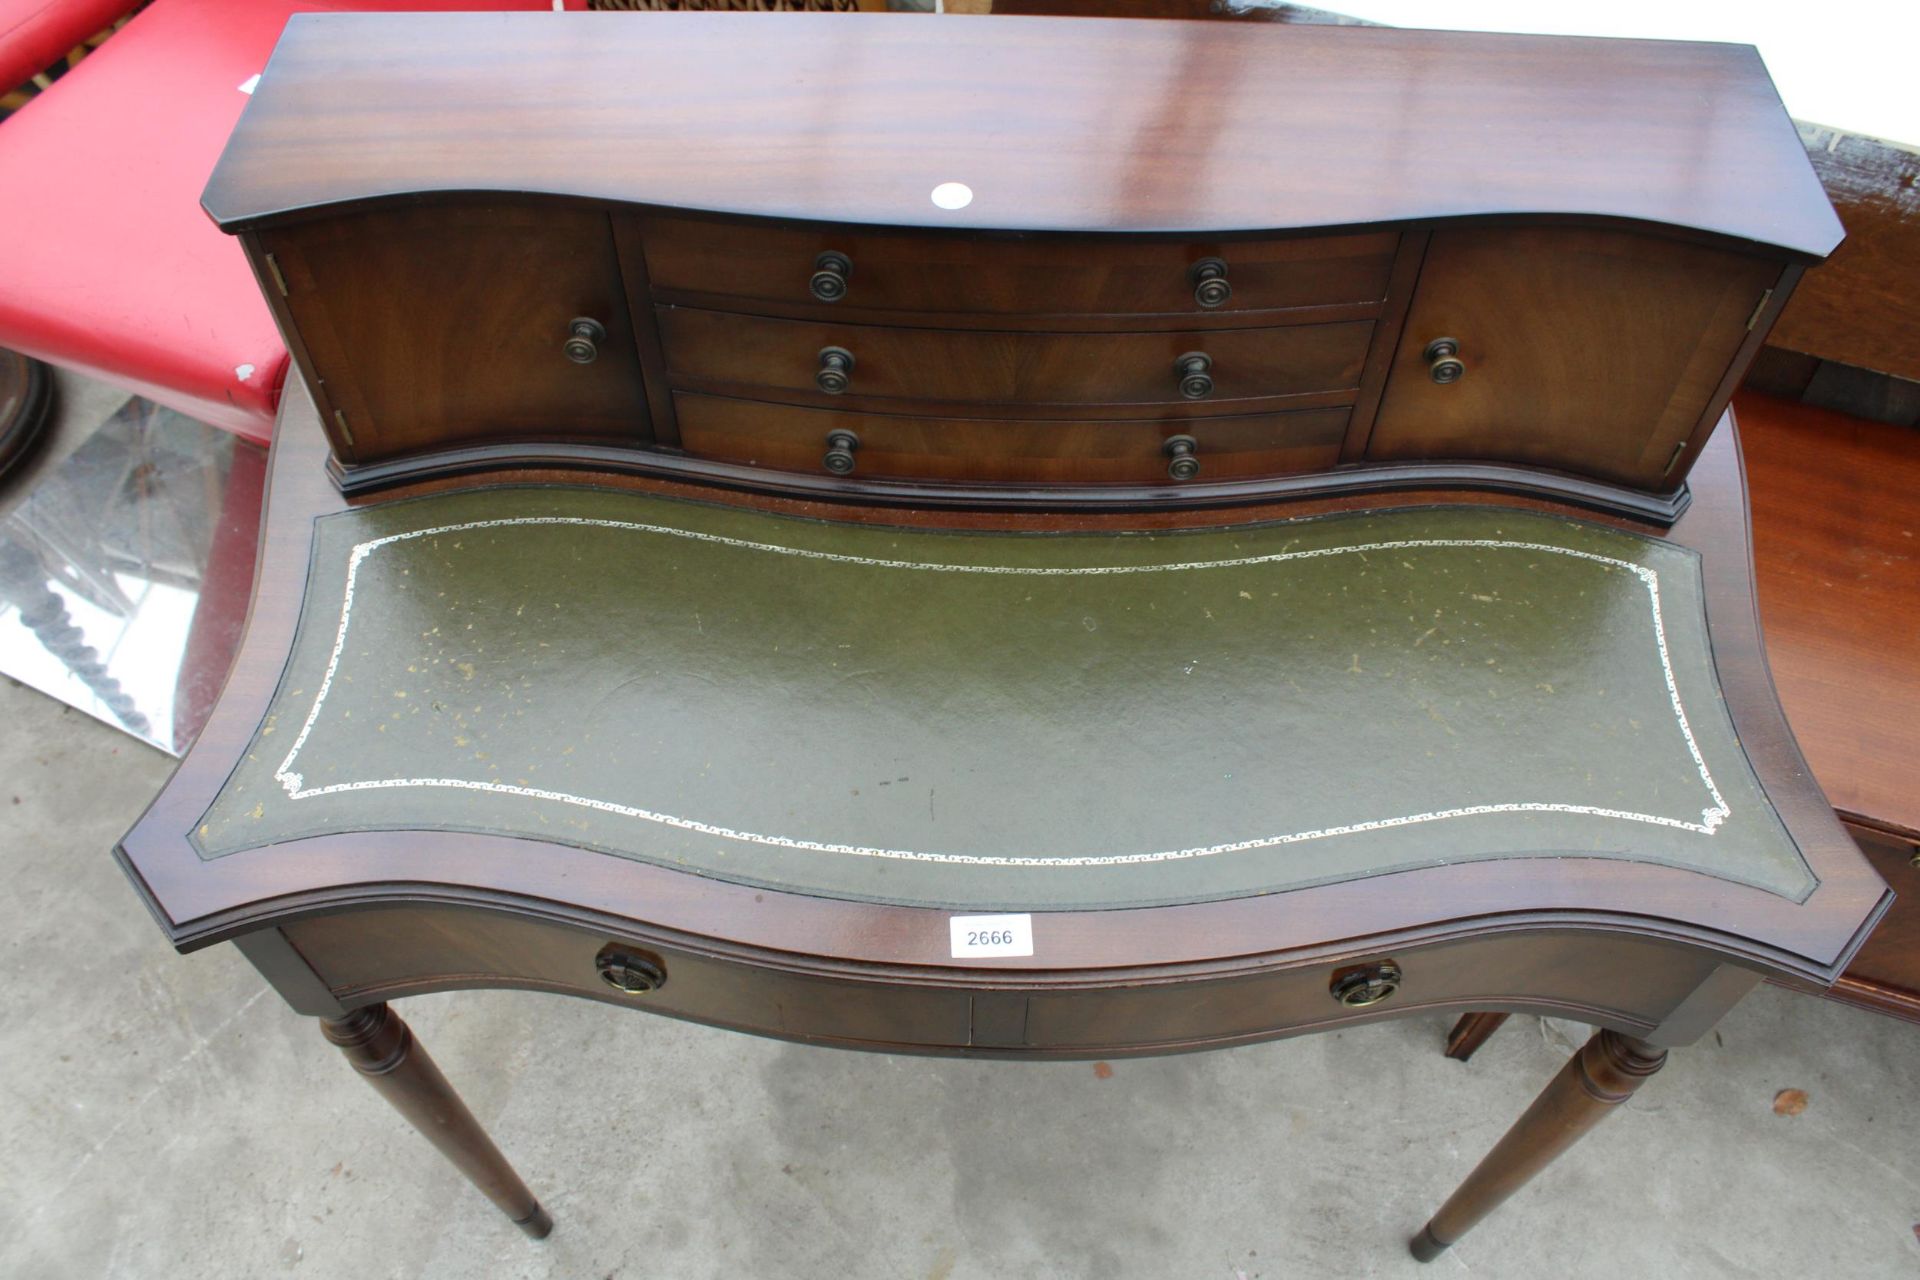 A REPRODUCTION MAHOGANY LADIES WRITING TABLE 36" WIDE WITH INSET LEATHER TOP - Image 3 of 4